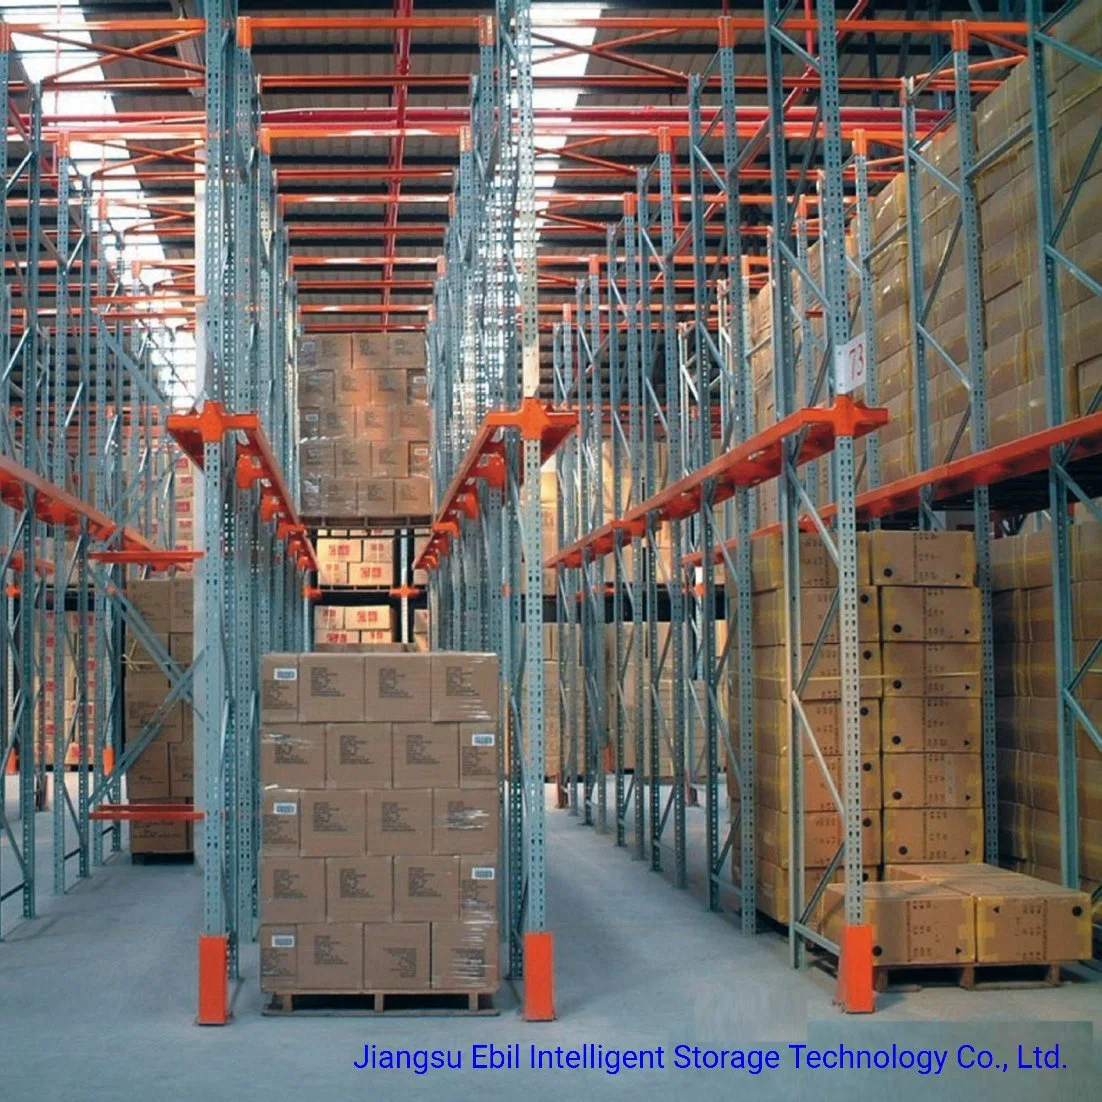 Heavy Duty Steel Rack Storage System Adjustable Selective Drive in Pallet Racking System